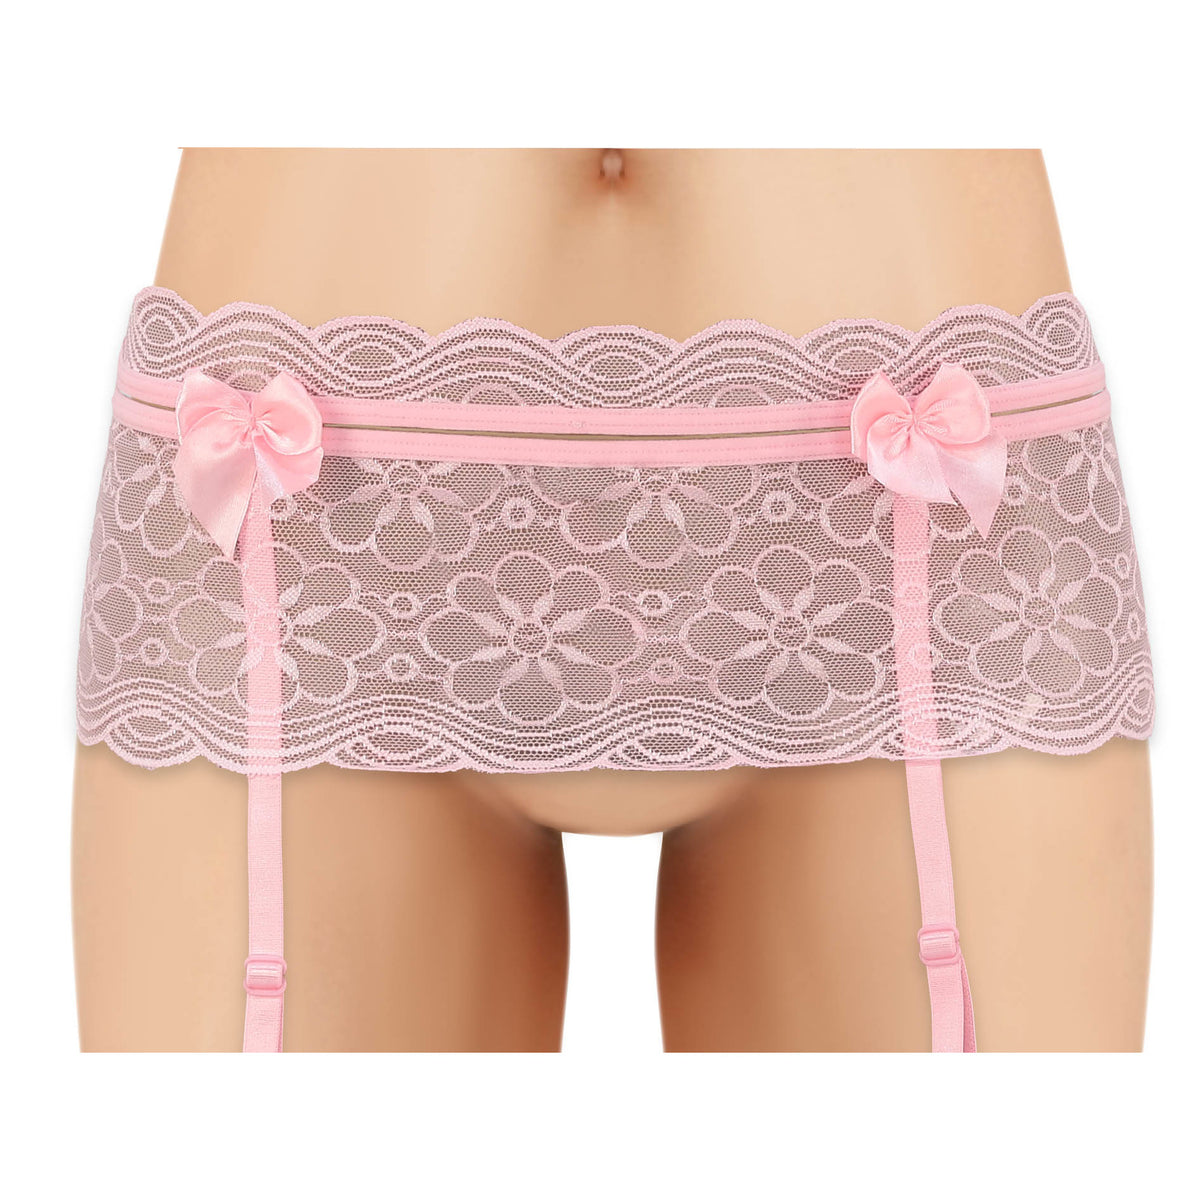 Cherry Wear Lace Garter Belt with Bows - Pink - O/S